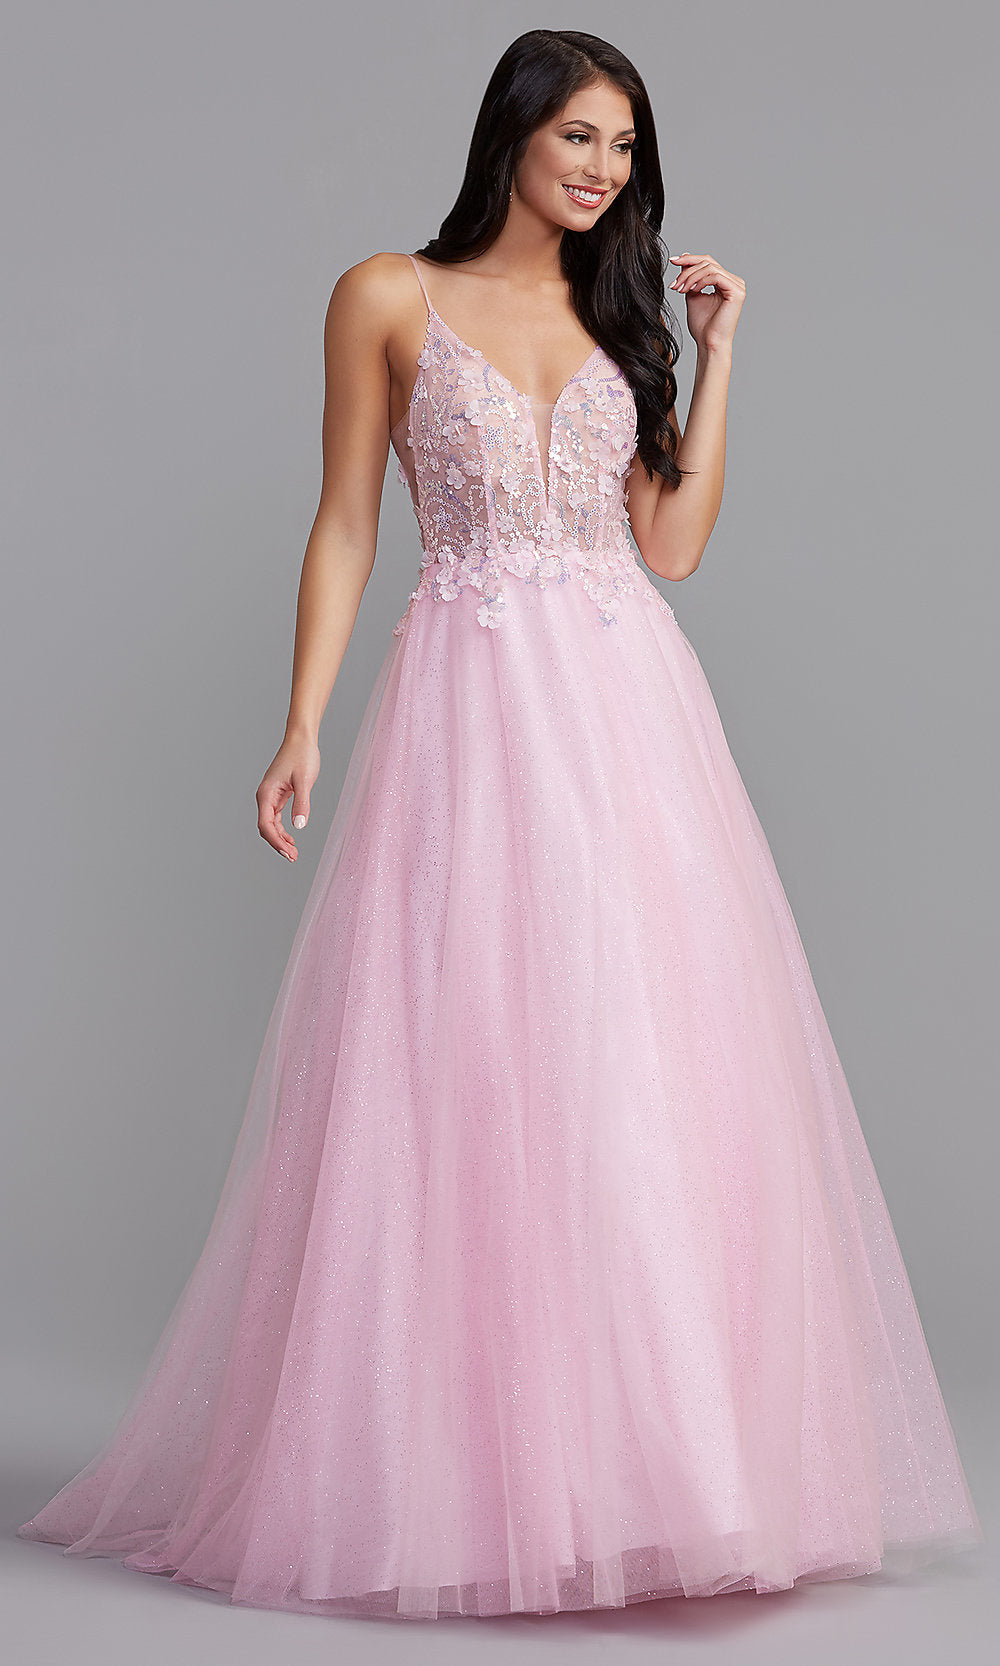 Iridescent Pink Sequin-Bodice Long Glitter Prom Ball Gown